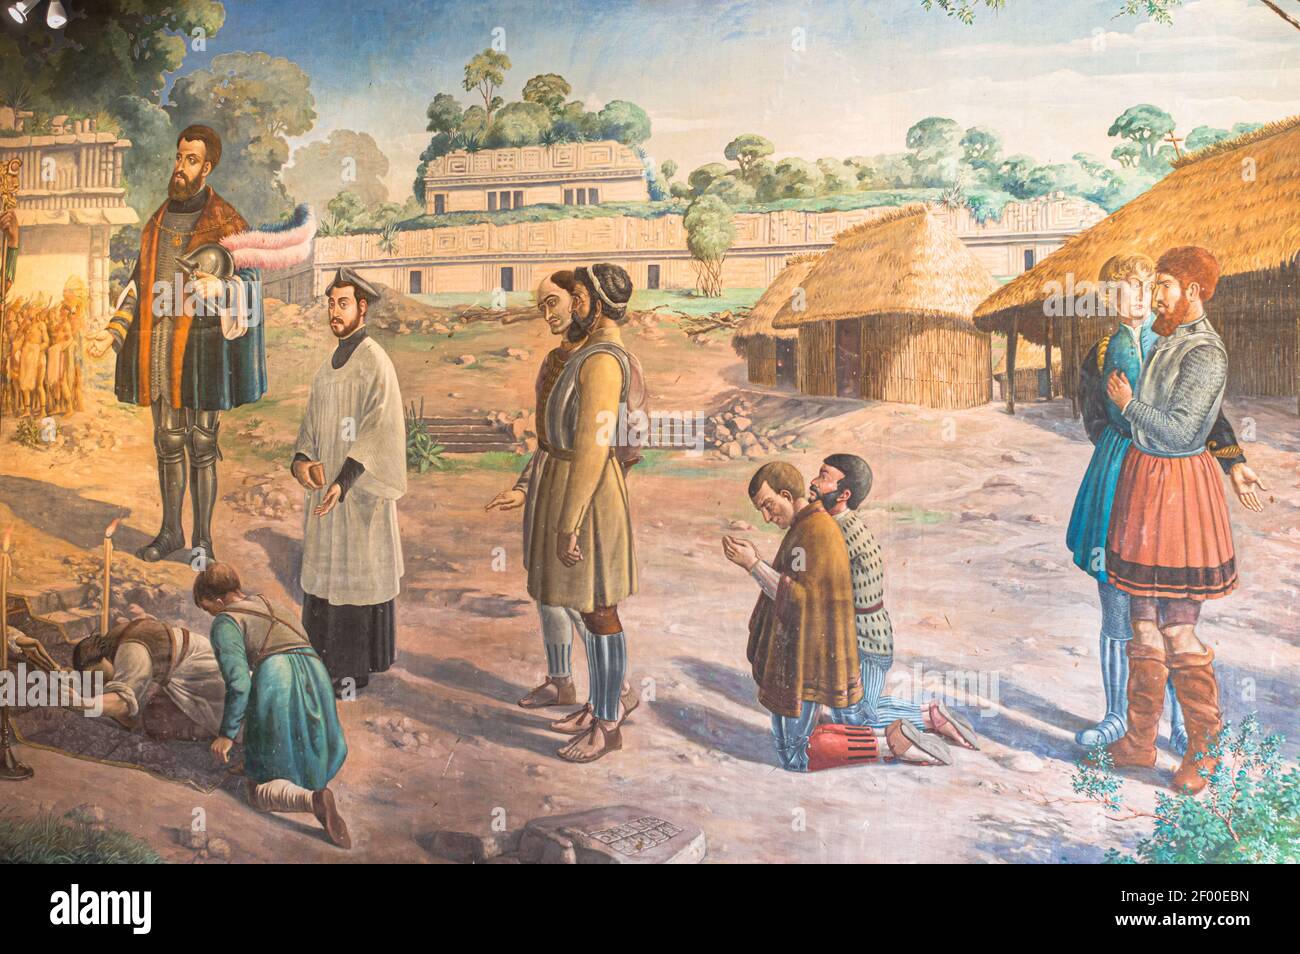 Painting at the Museo de Arte Sacro in Conkal, Yucatan, depicting the evangelisation of the Maya people on behalf of the Spanish conquistadores Stock Photo